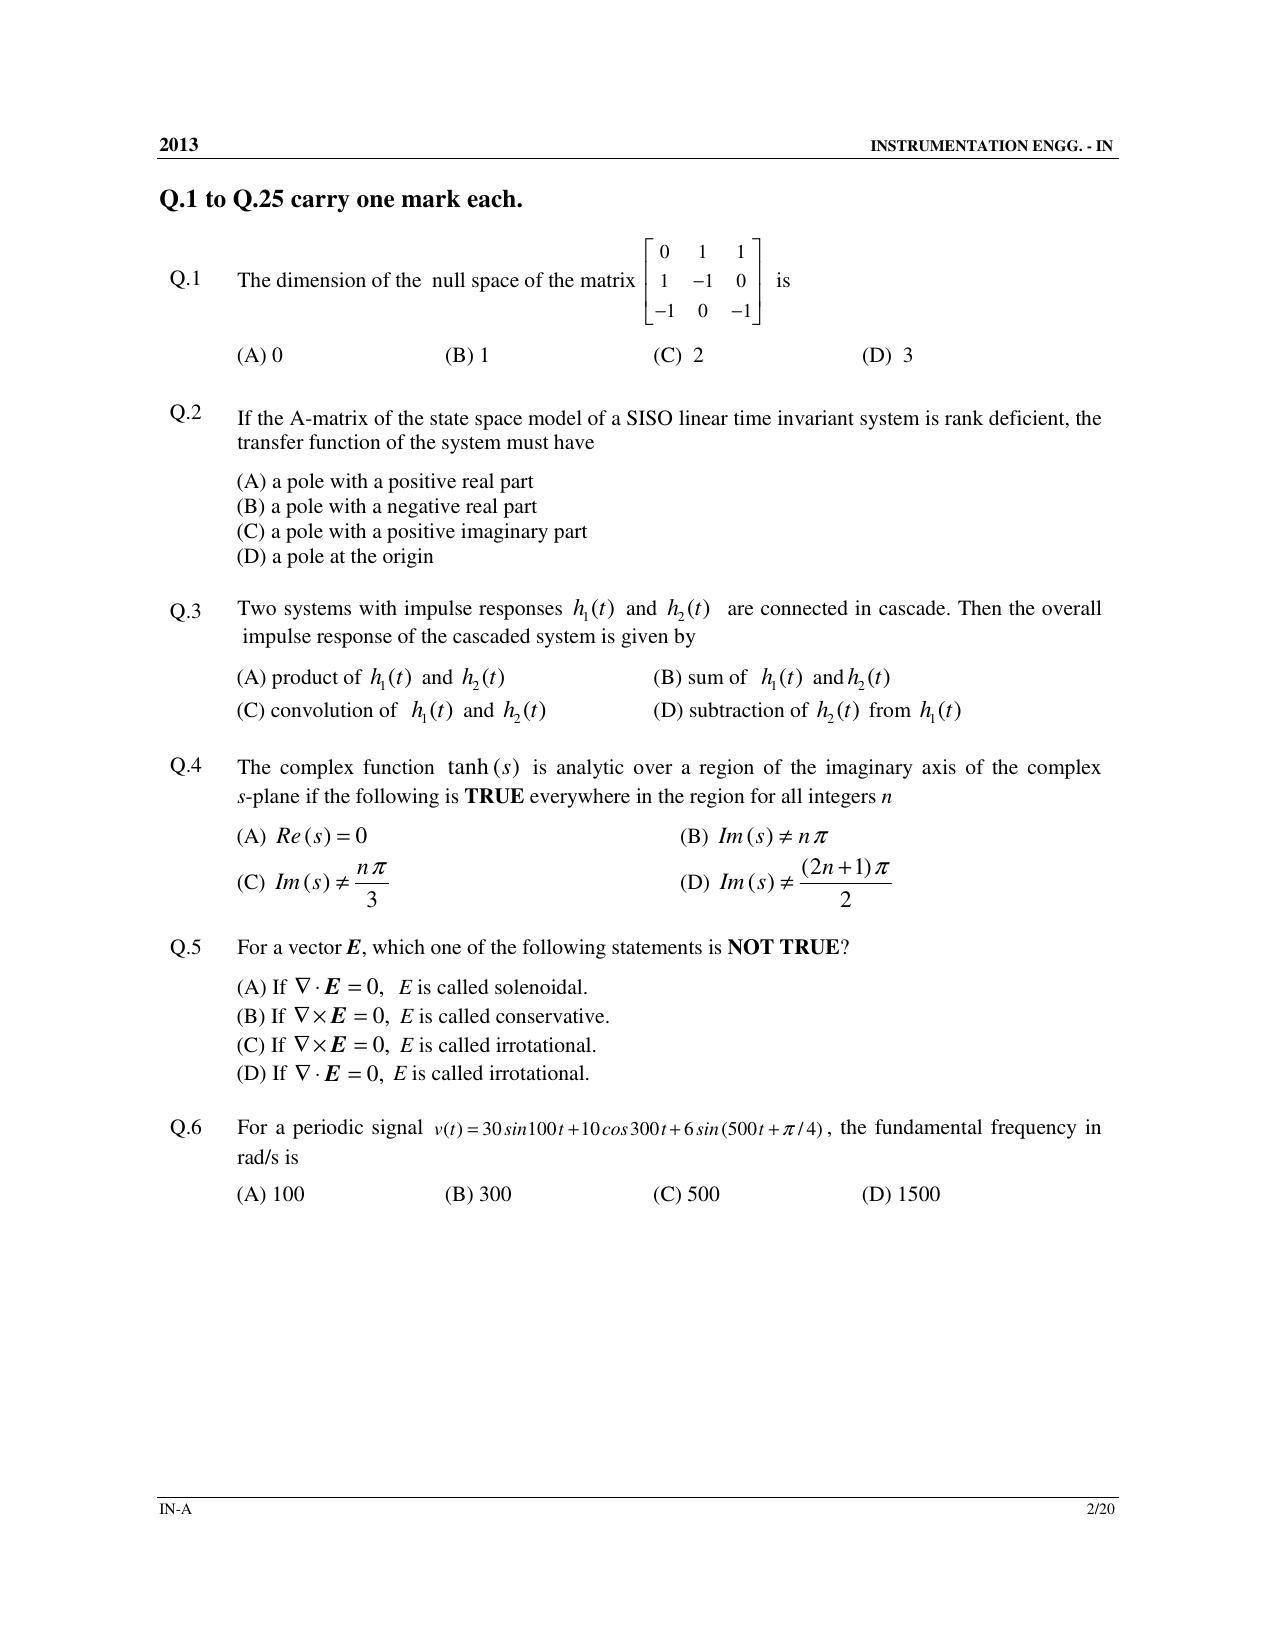 GATE 2013 Instrumentation Engineering (IN) Question Paper with Answer Key - Page 3